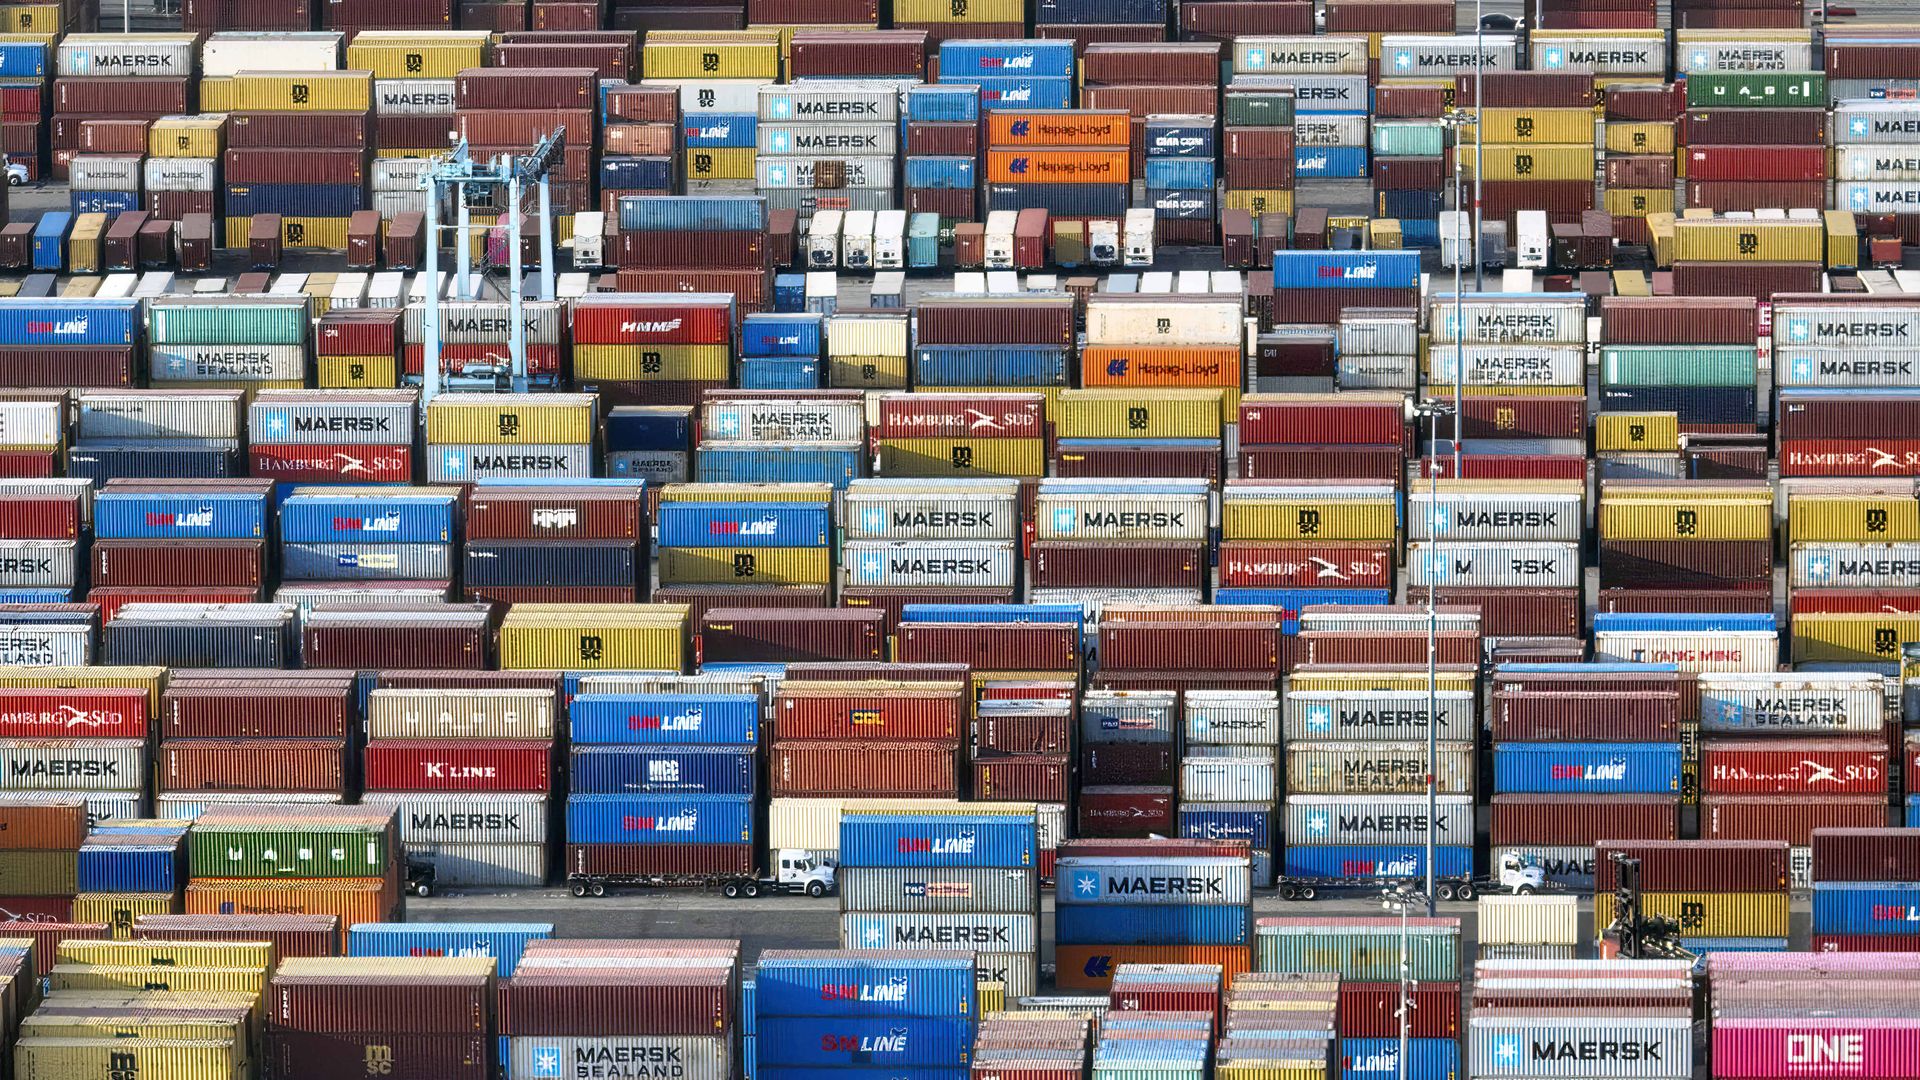 Containers are stacked up on Terminal Island in the Port of Long Beach in Long Beach, CA, on Monday, November 15, 2021. (Photo by Jeff Gritchen/MediaNews Group/Orange County Register via Getty Images)